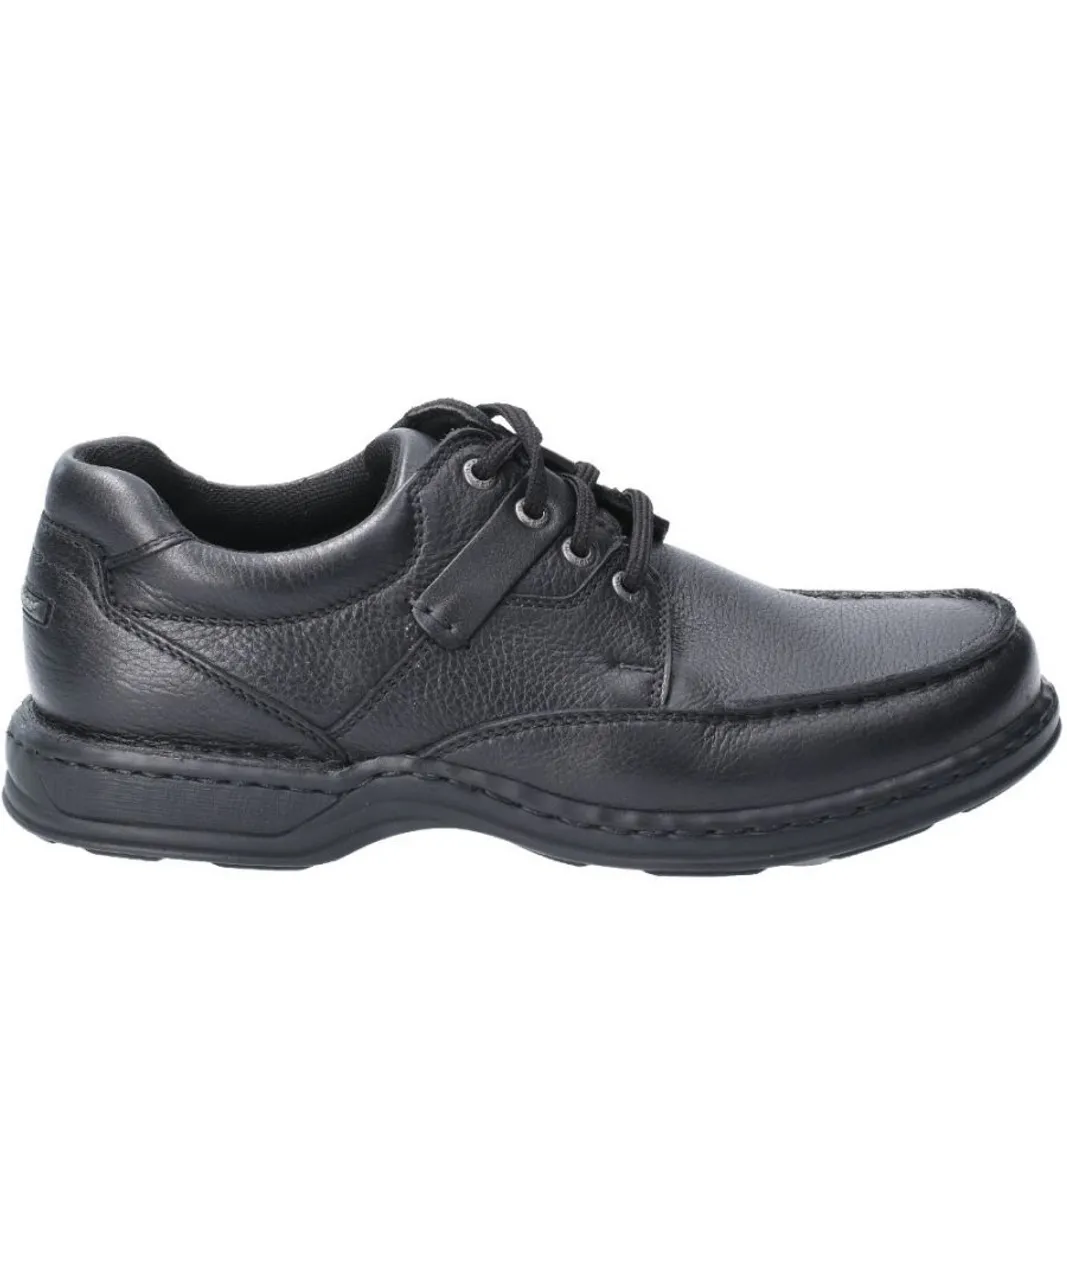 Hush Puppies Mens Randall II Laced Leather Shoe Oxford Shoes - Black